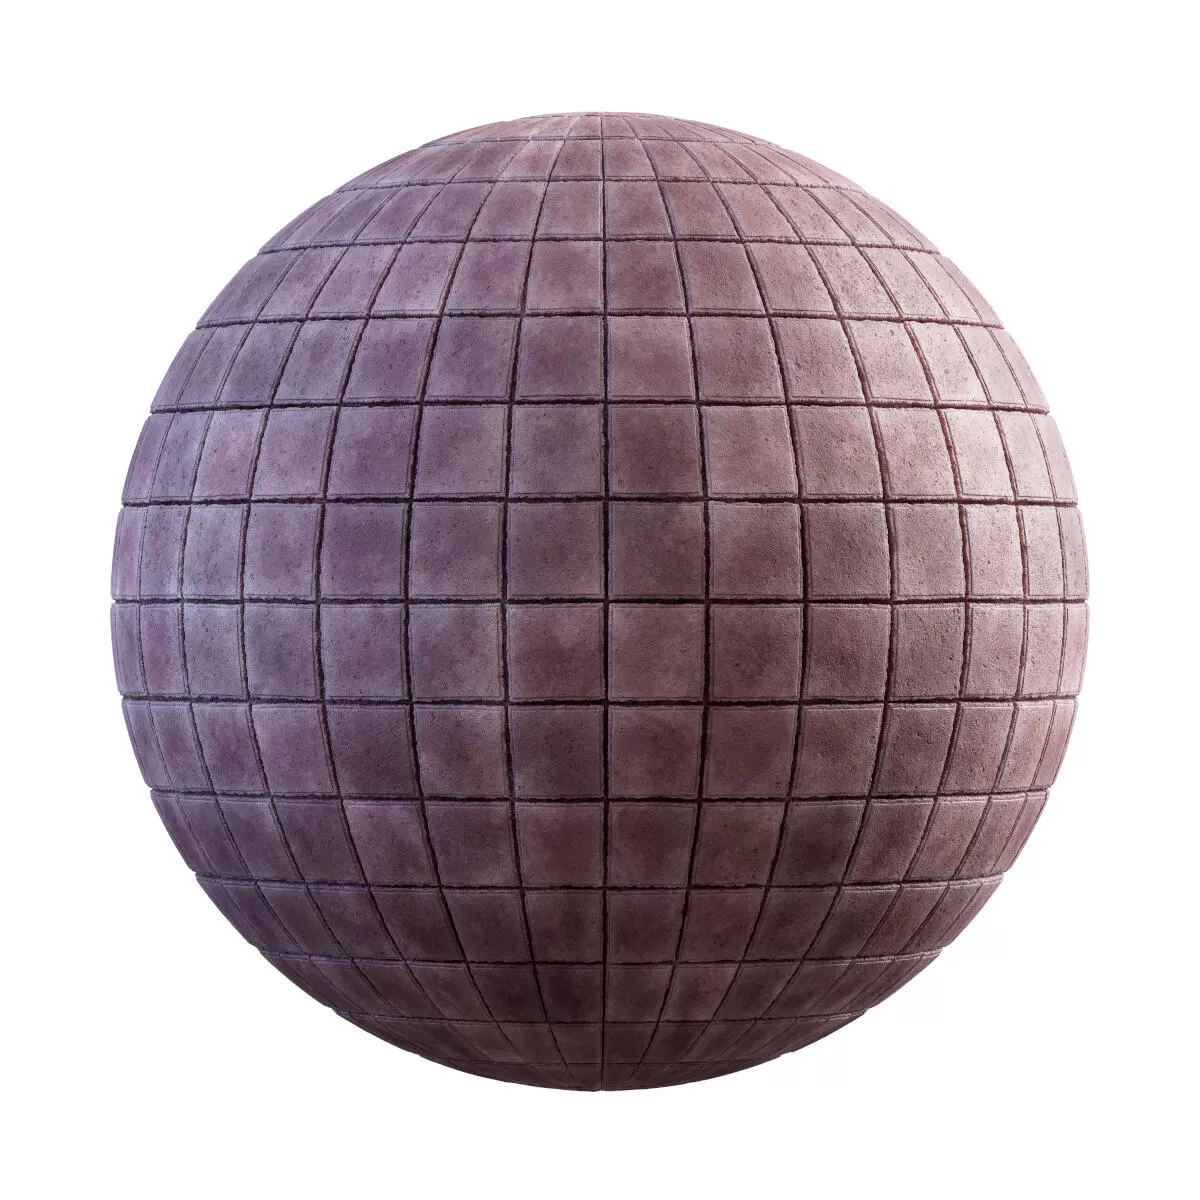 PBR Textures Volume 34 – Pavements – 4K – red_square_stone_pavement_36_38